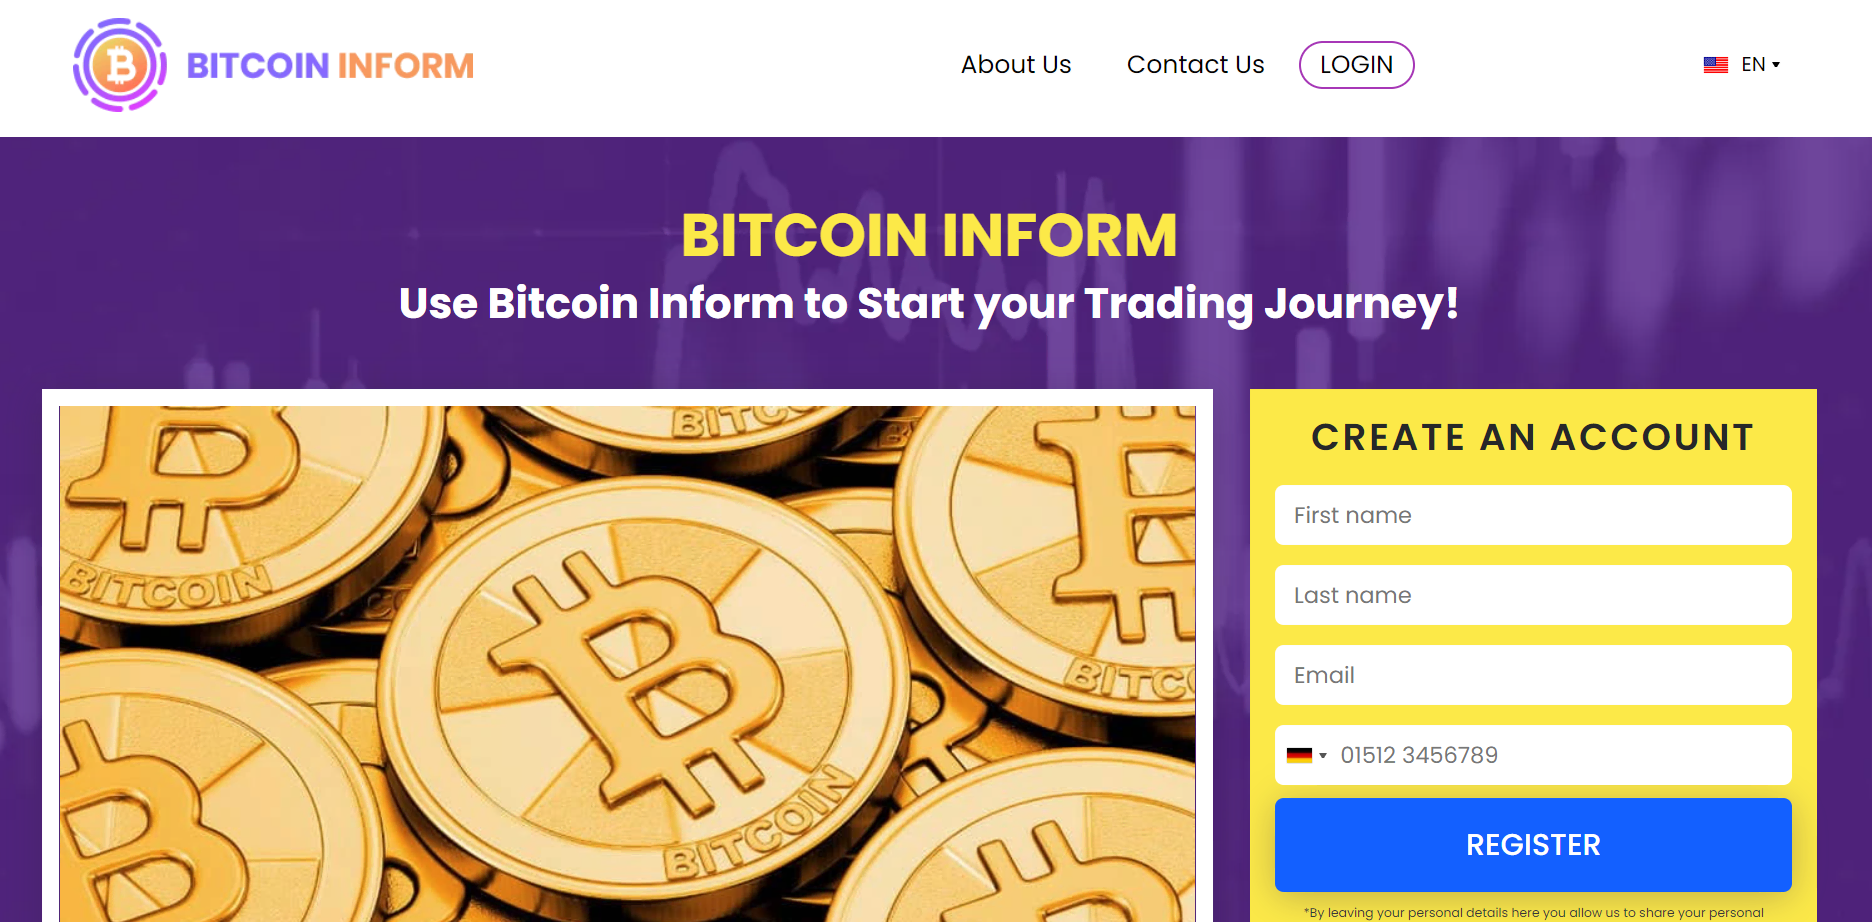 the official website of Bitcoin Inform